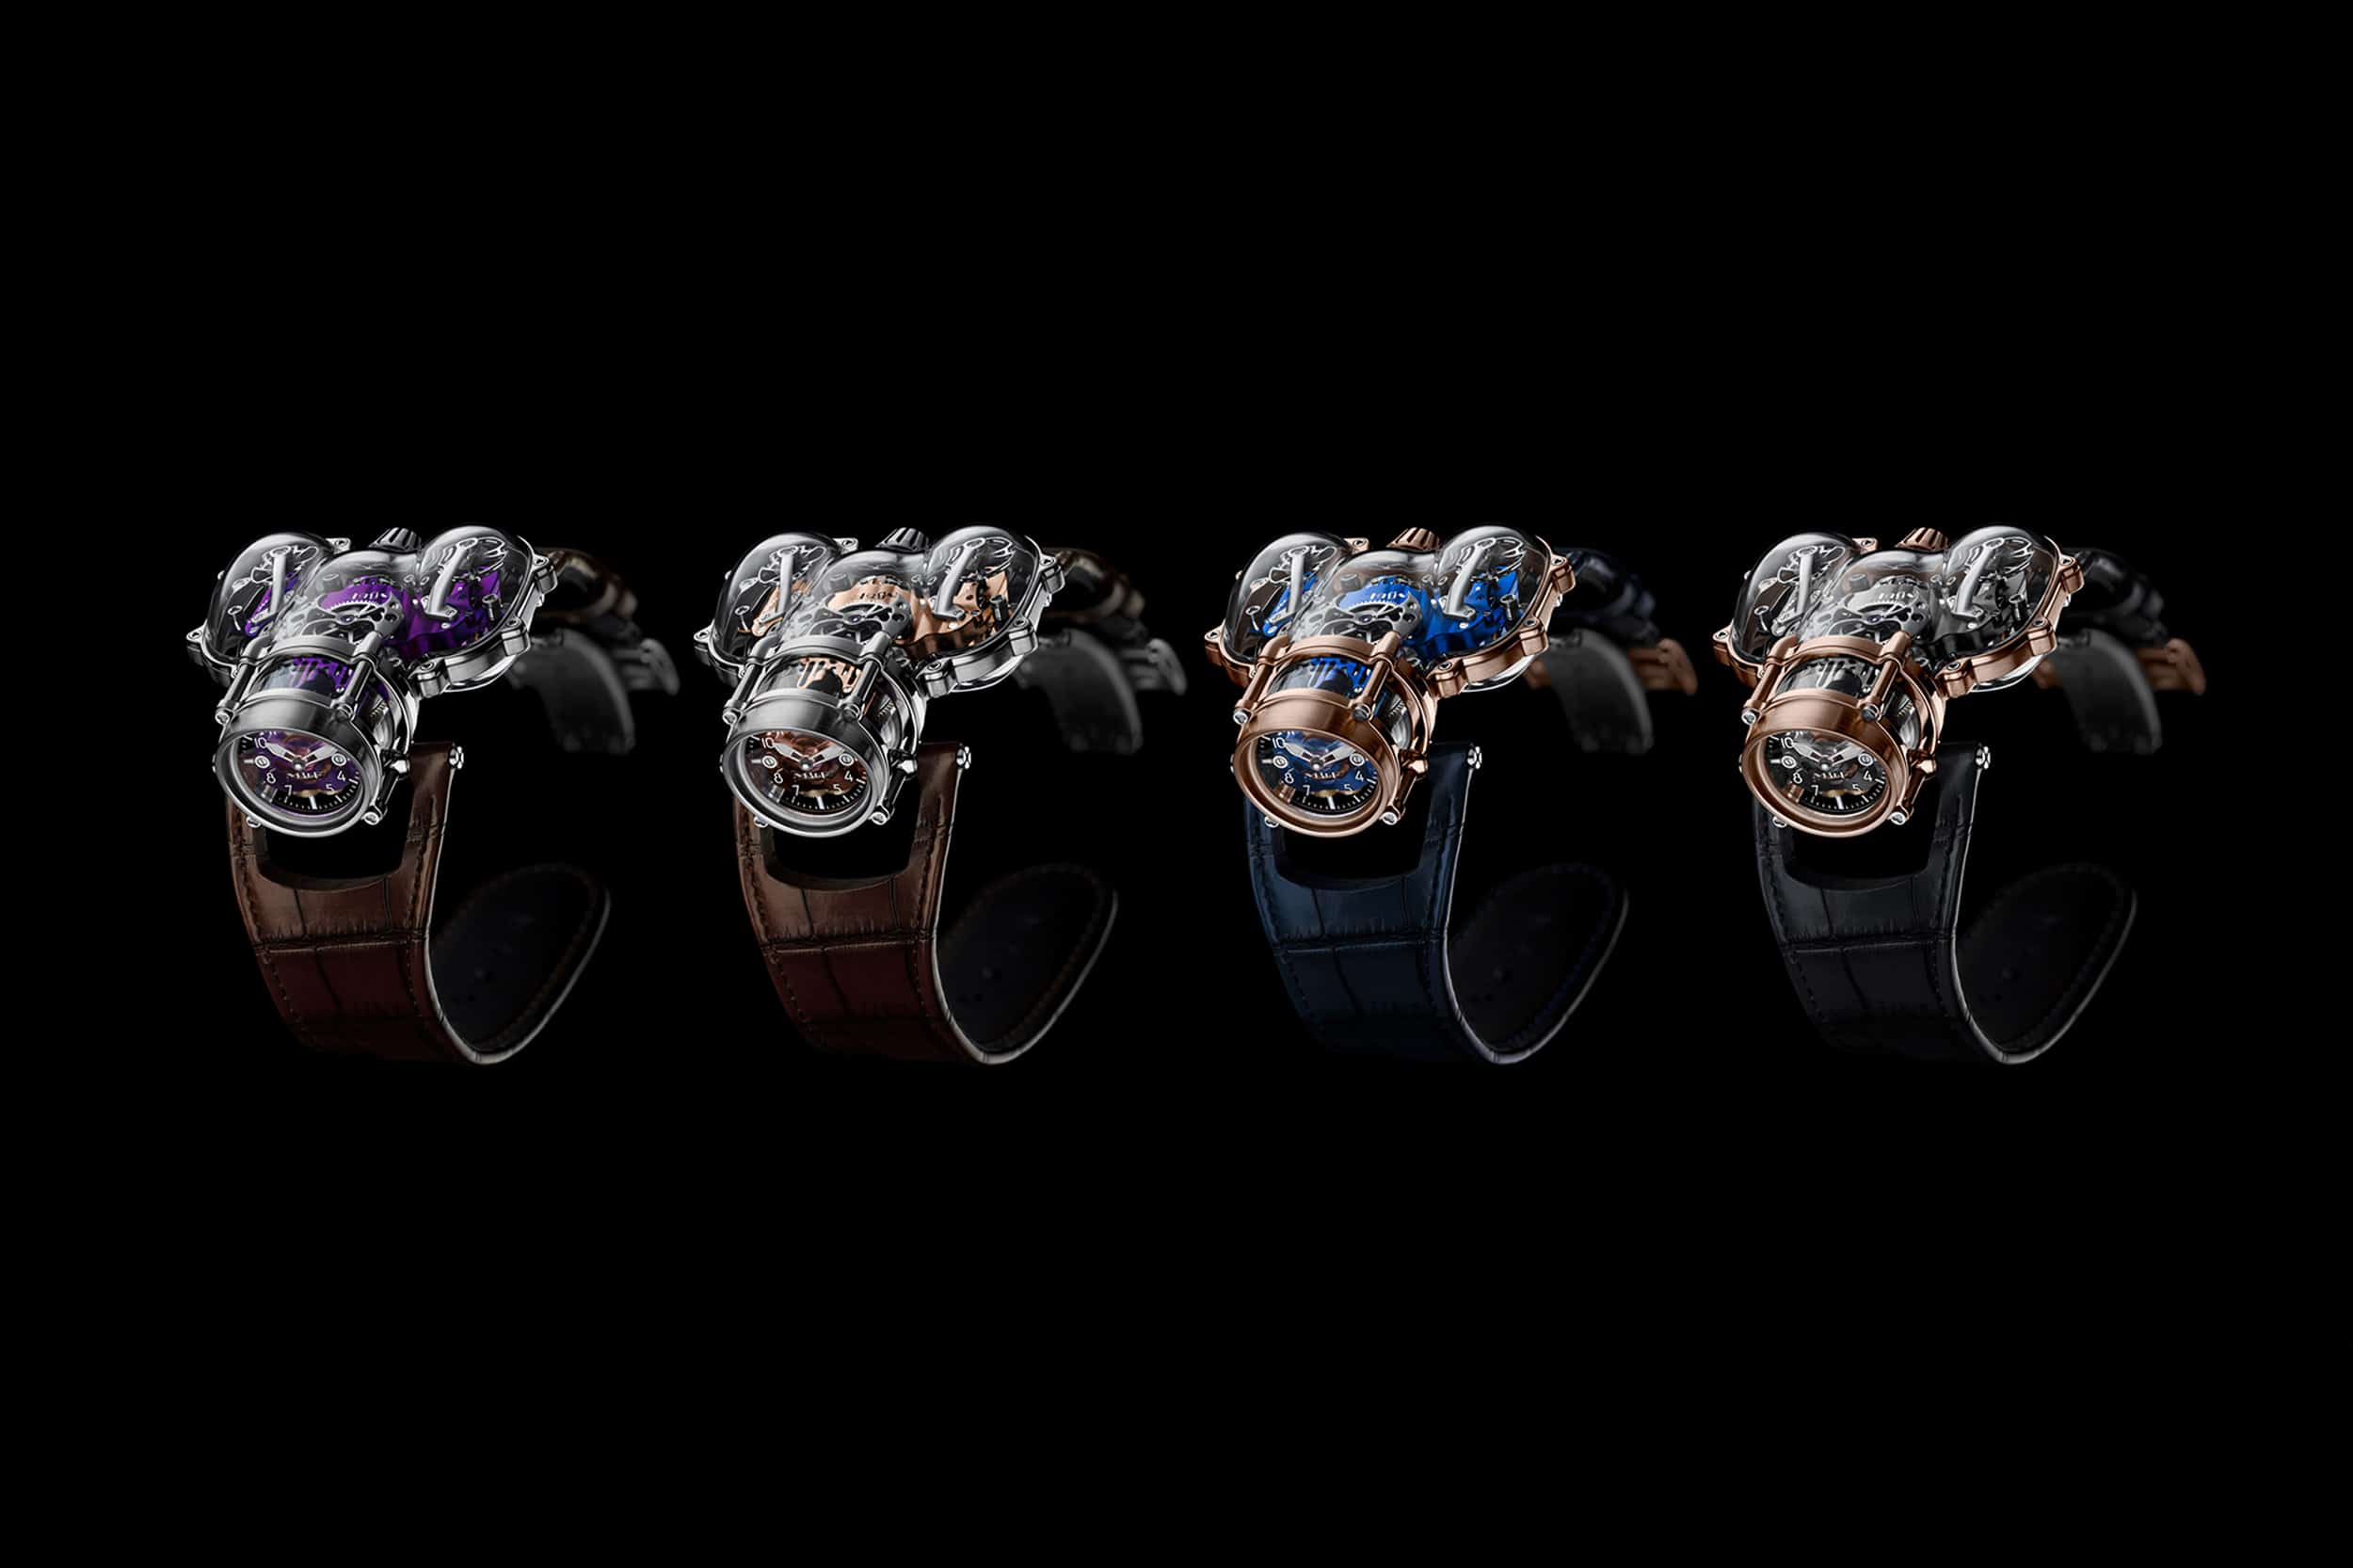 Pure Imagination: The MB&F Horological Machine No. 9 – “Sapphire Vision”